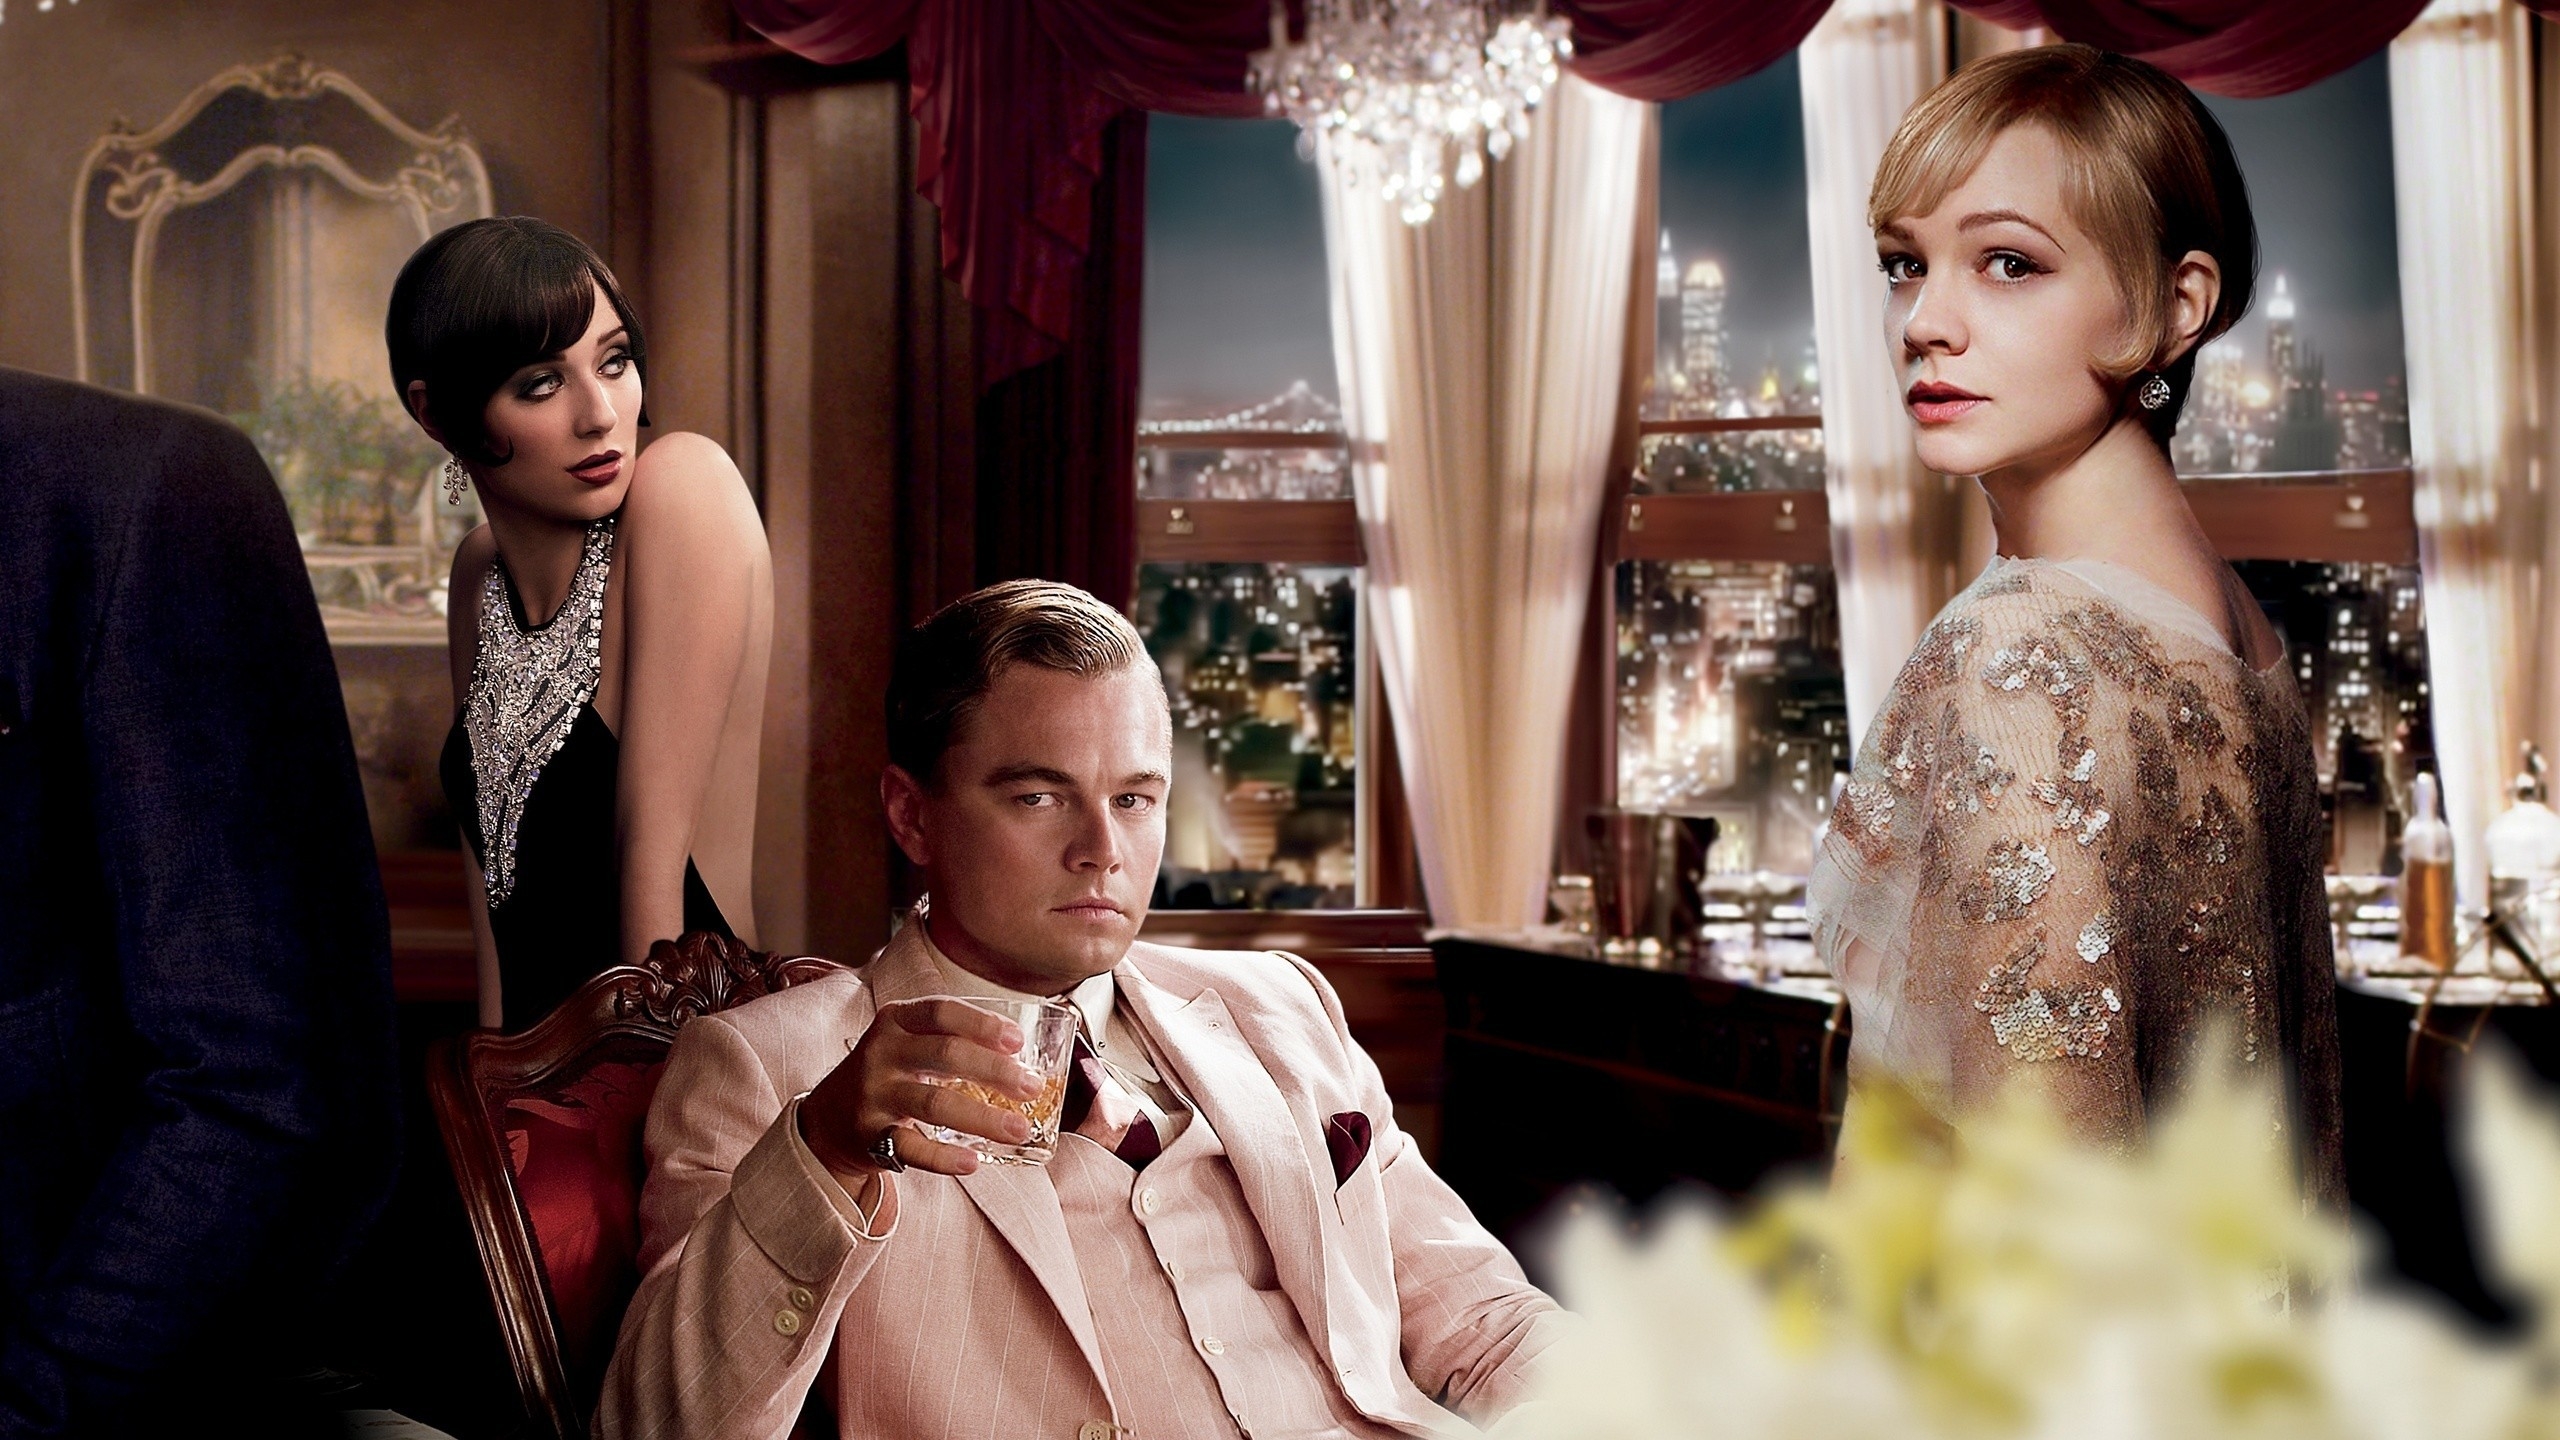 The Great Gatsby Poster for 2560x1440 HDTV resolution